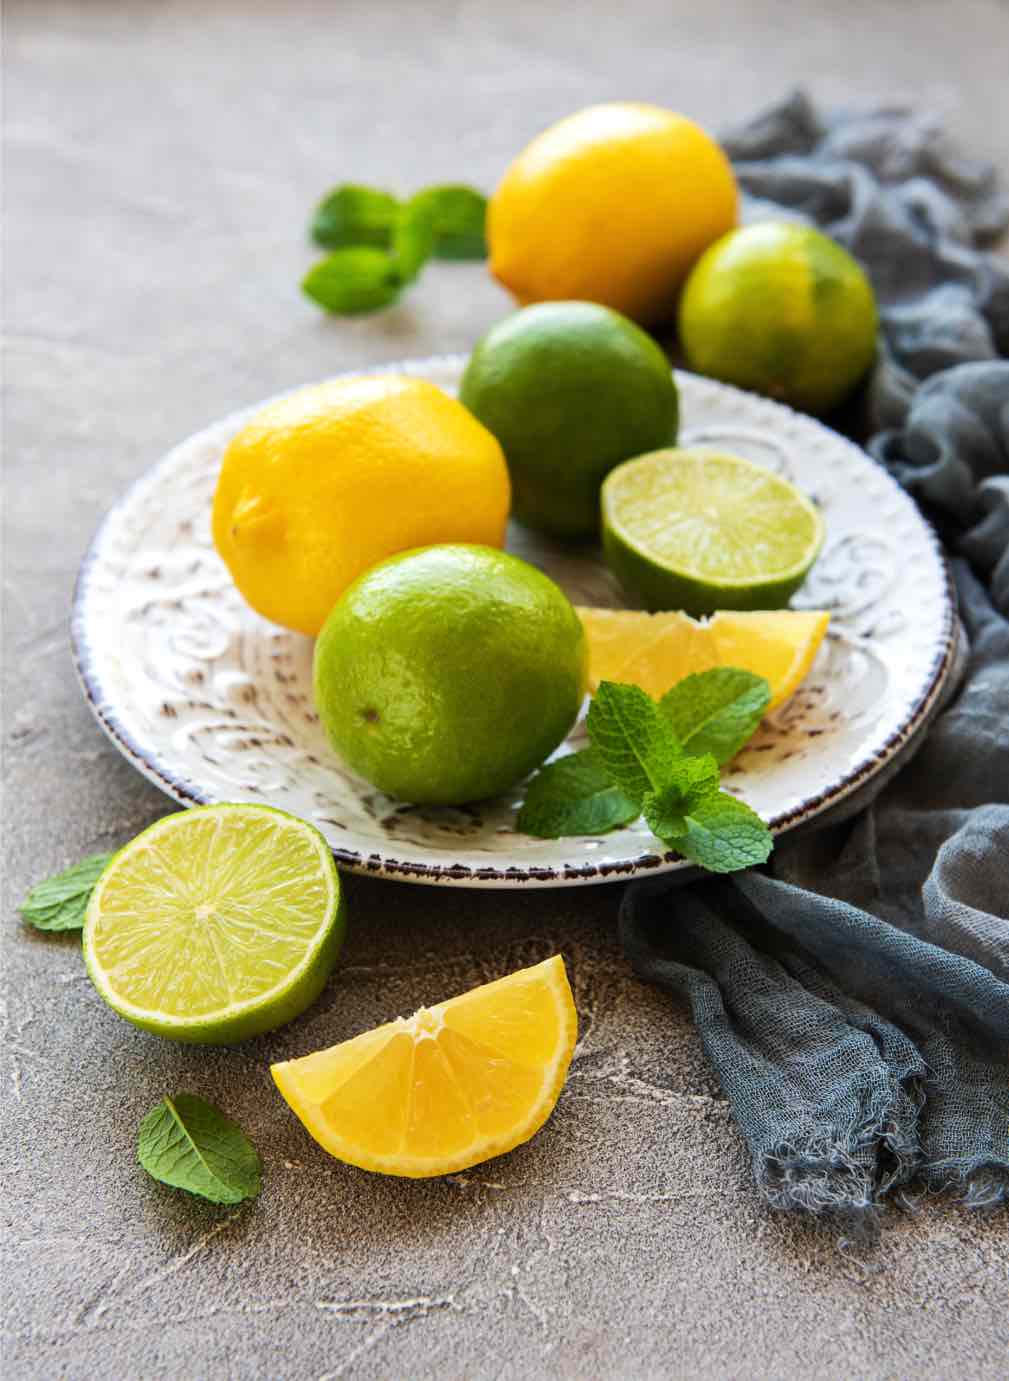 Lemons and limes are great for humans, but not for dogs - learn more with Dog Training Elite Des Moines in Des Moines!